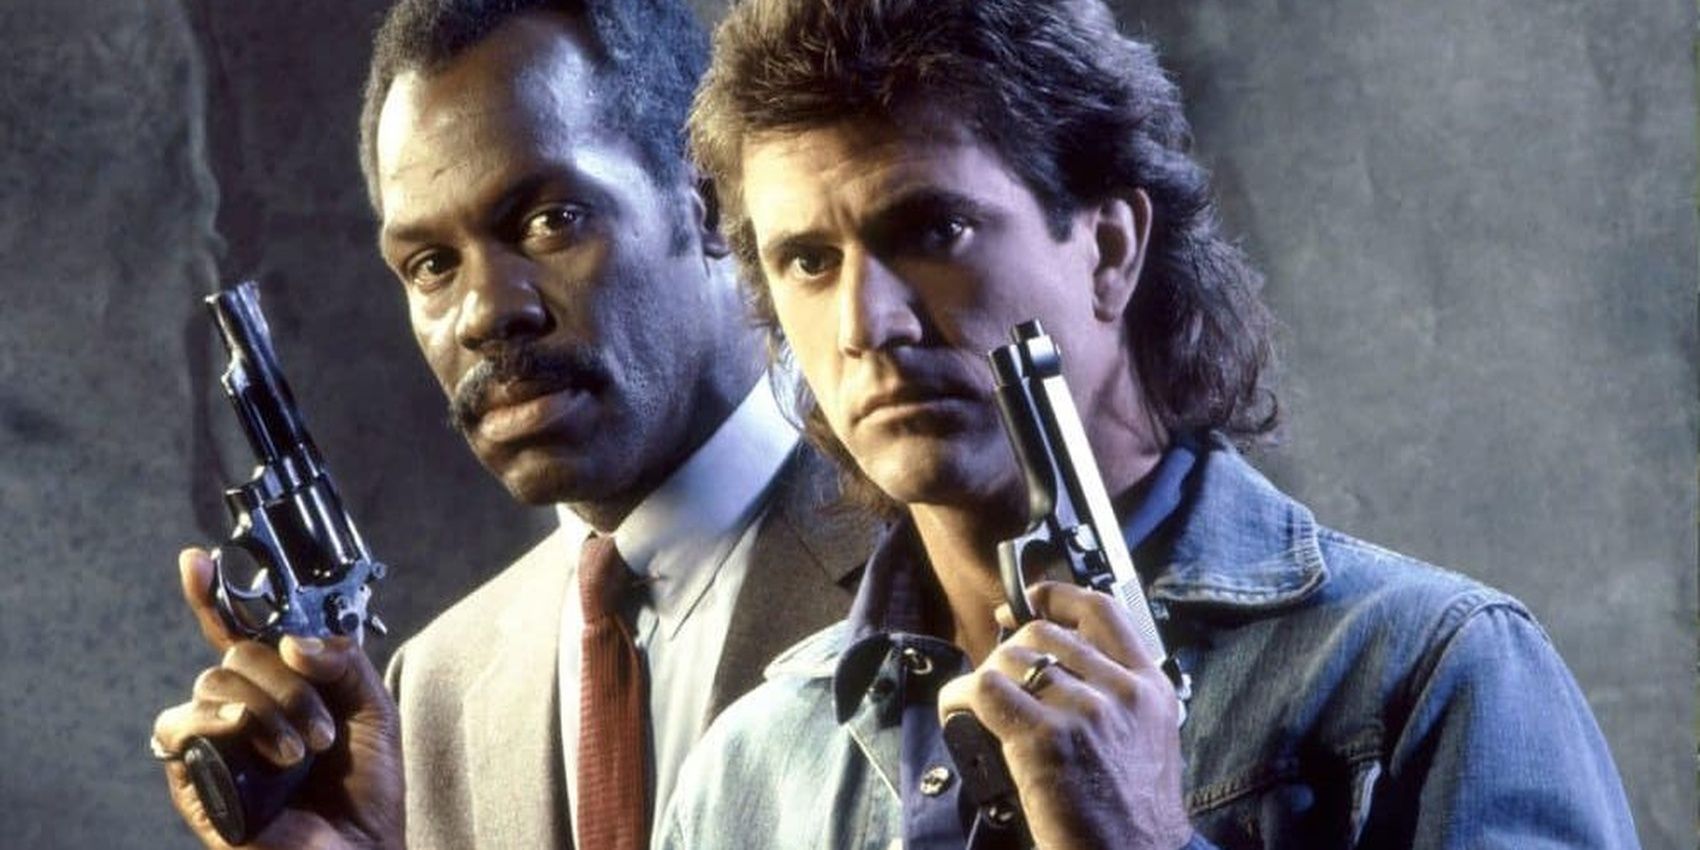 5 Reasons Lethal Weapon Is Better Than Die Hard (& 5 Reasons Die Hard Is Better)